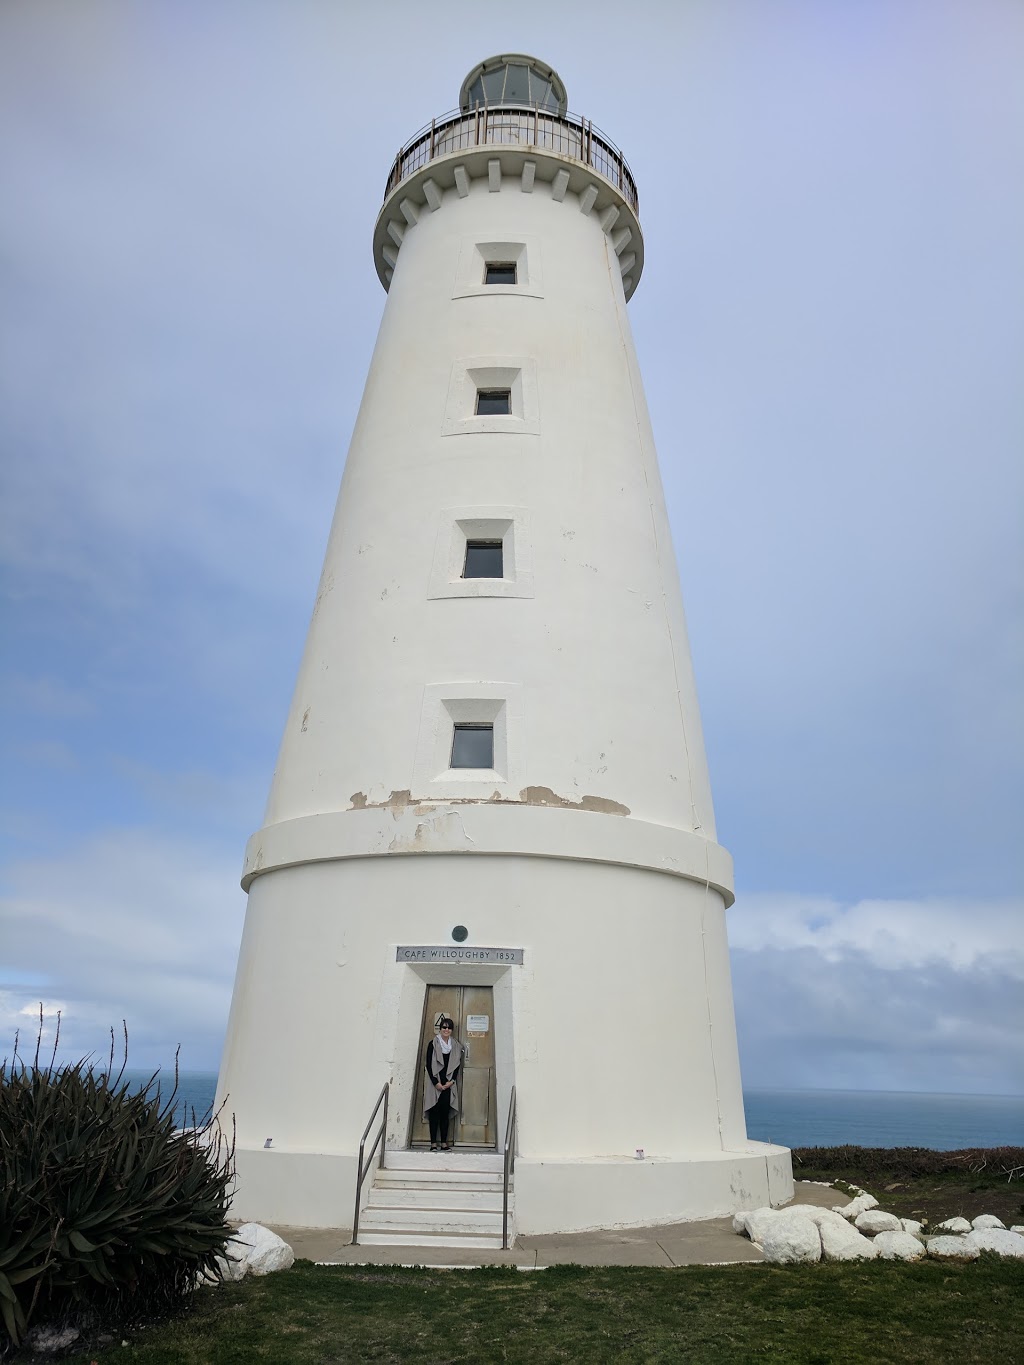 Cape Willoughby Lighthouse Keepers Heritage Accommodation | Cape Willoughby Conservation Park, Cape Willoughby Road, Kangaroo Island SA 5222, Australia | Phone: (08) 8553 4410